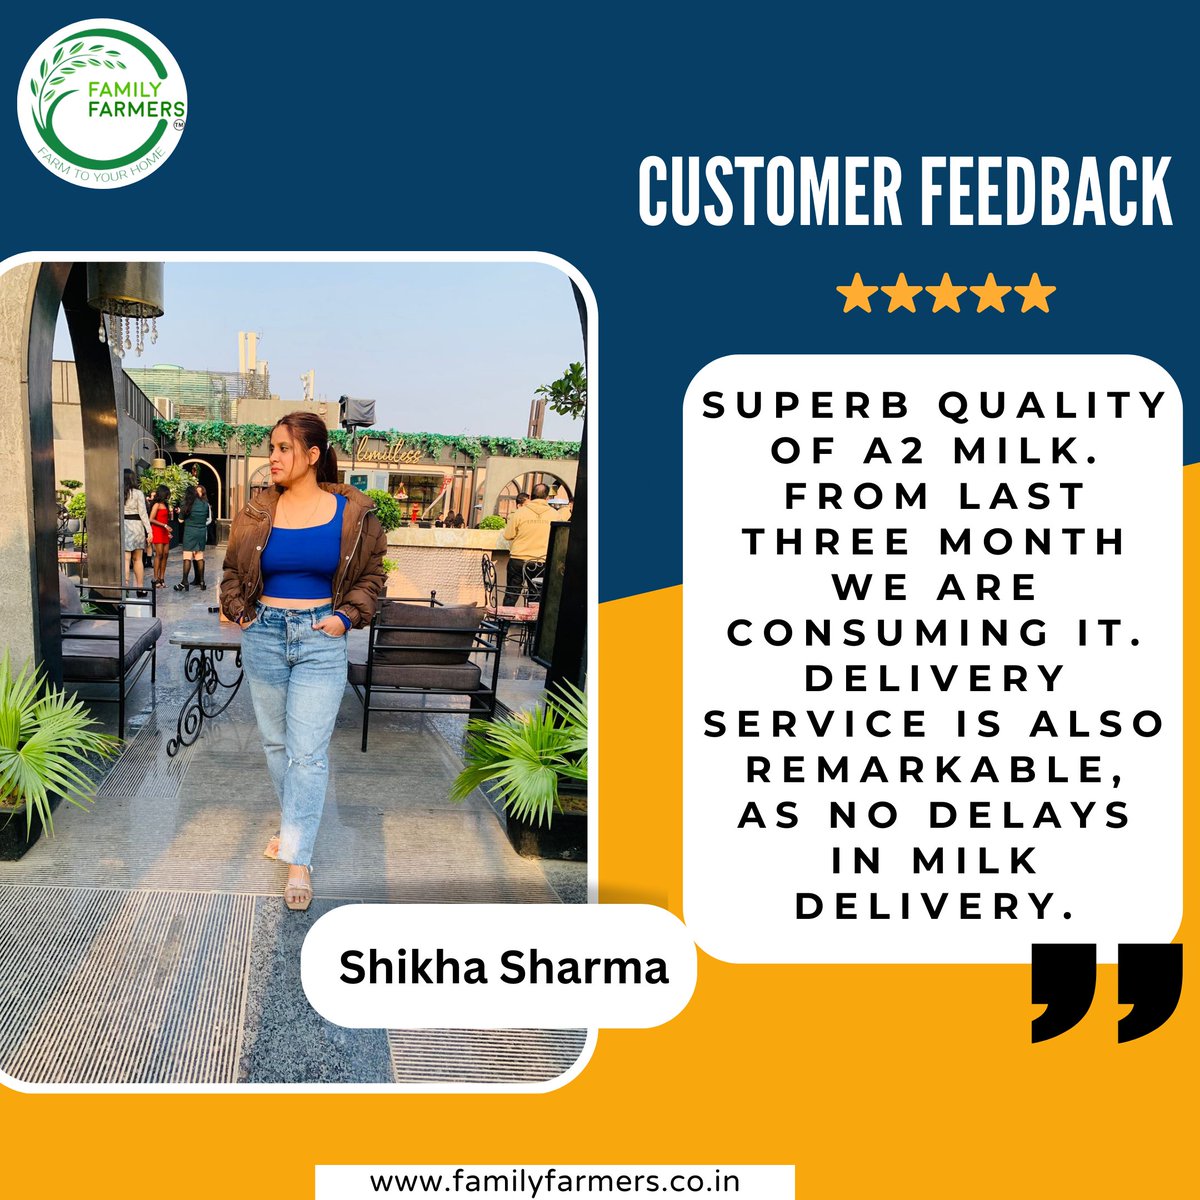 Family farmers #clientappreciation Your reviews are the building blocks of our success story. Together, we're creating something amazing!
. 
#familyfarmers #freshmilk #clients #happyclients #customers #clientreview #a2cowmilk #sahiwalcowmilk #sahiwalmilk